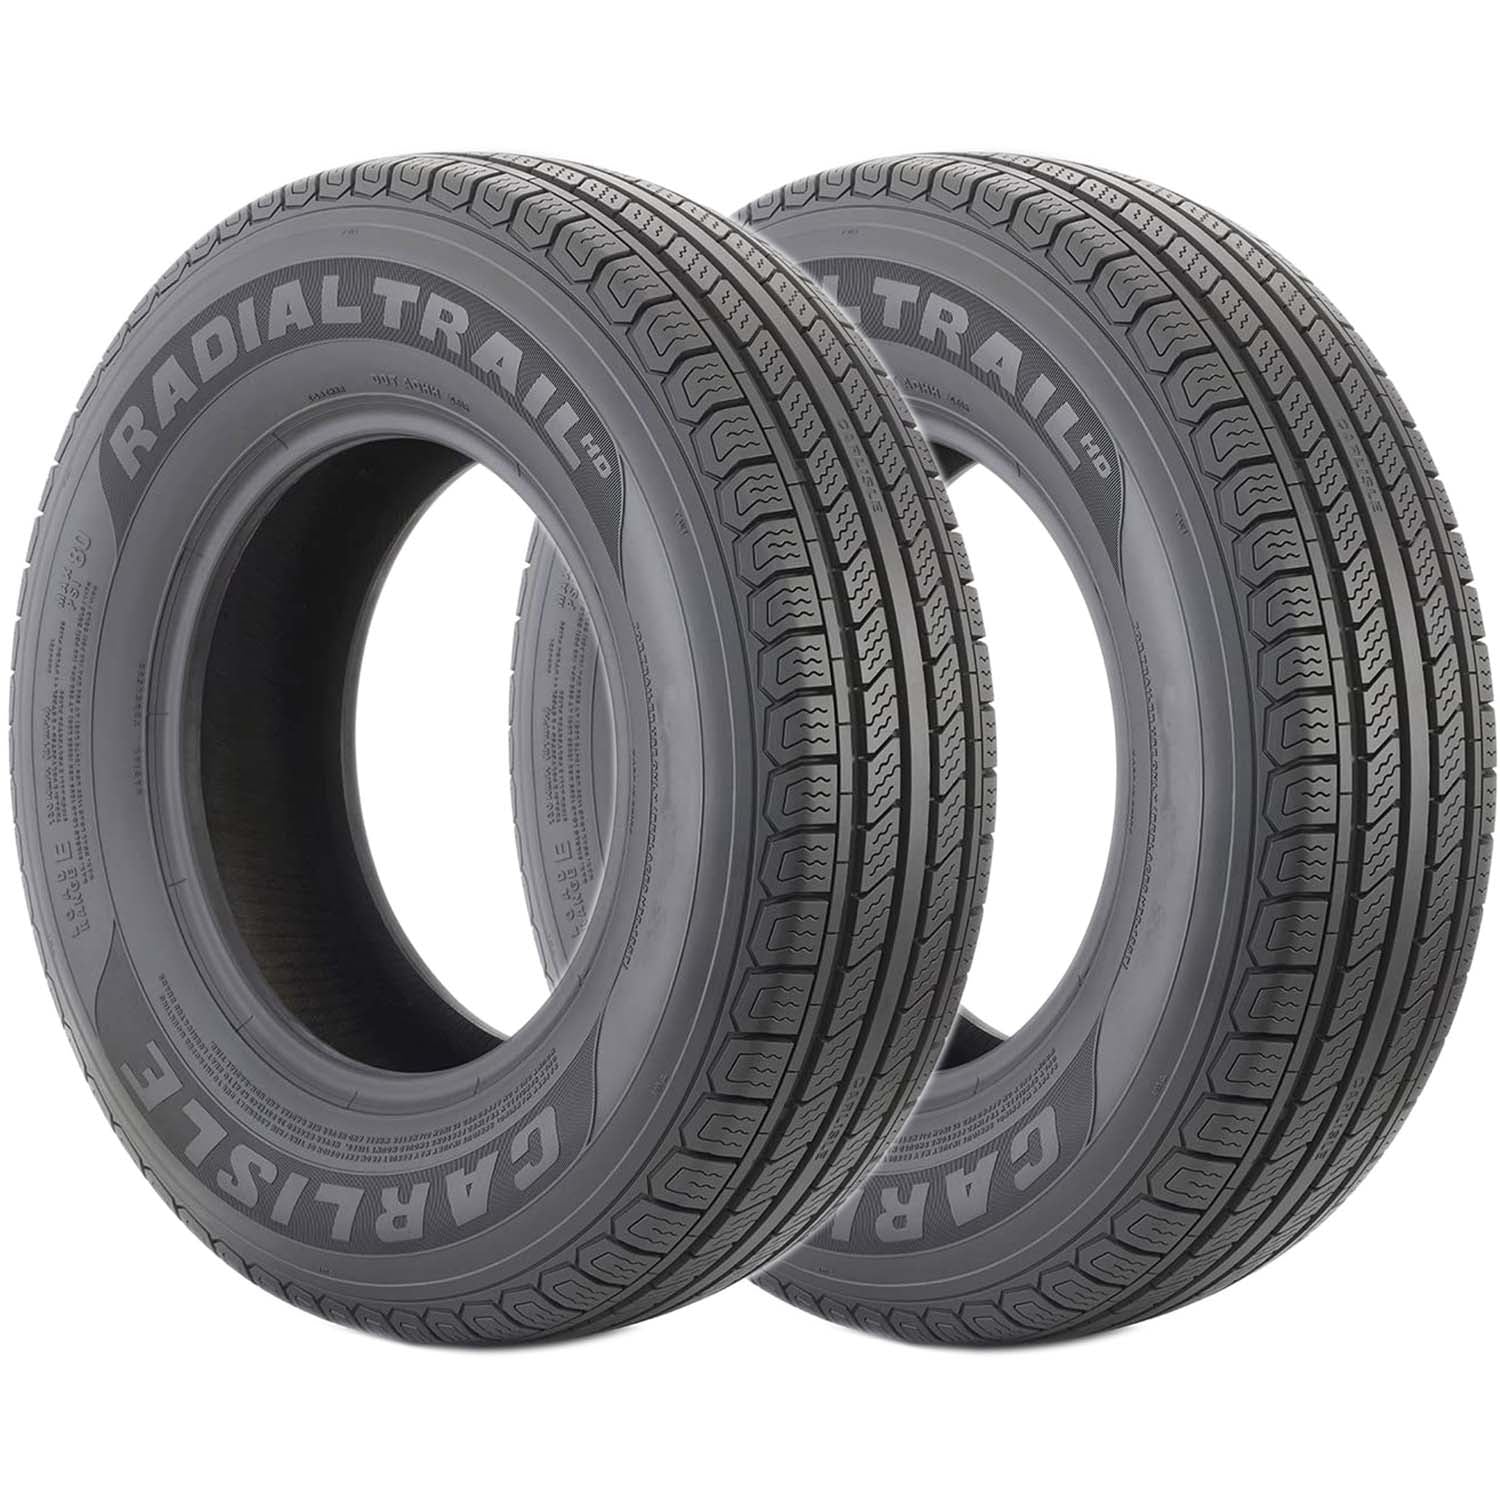 Carlisle Radial Trail HD Trailer Tire LRD 8ply ST205/75R15 Pack of 2